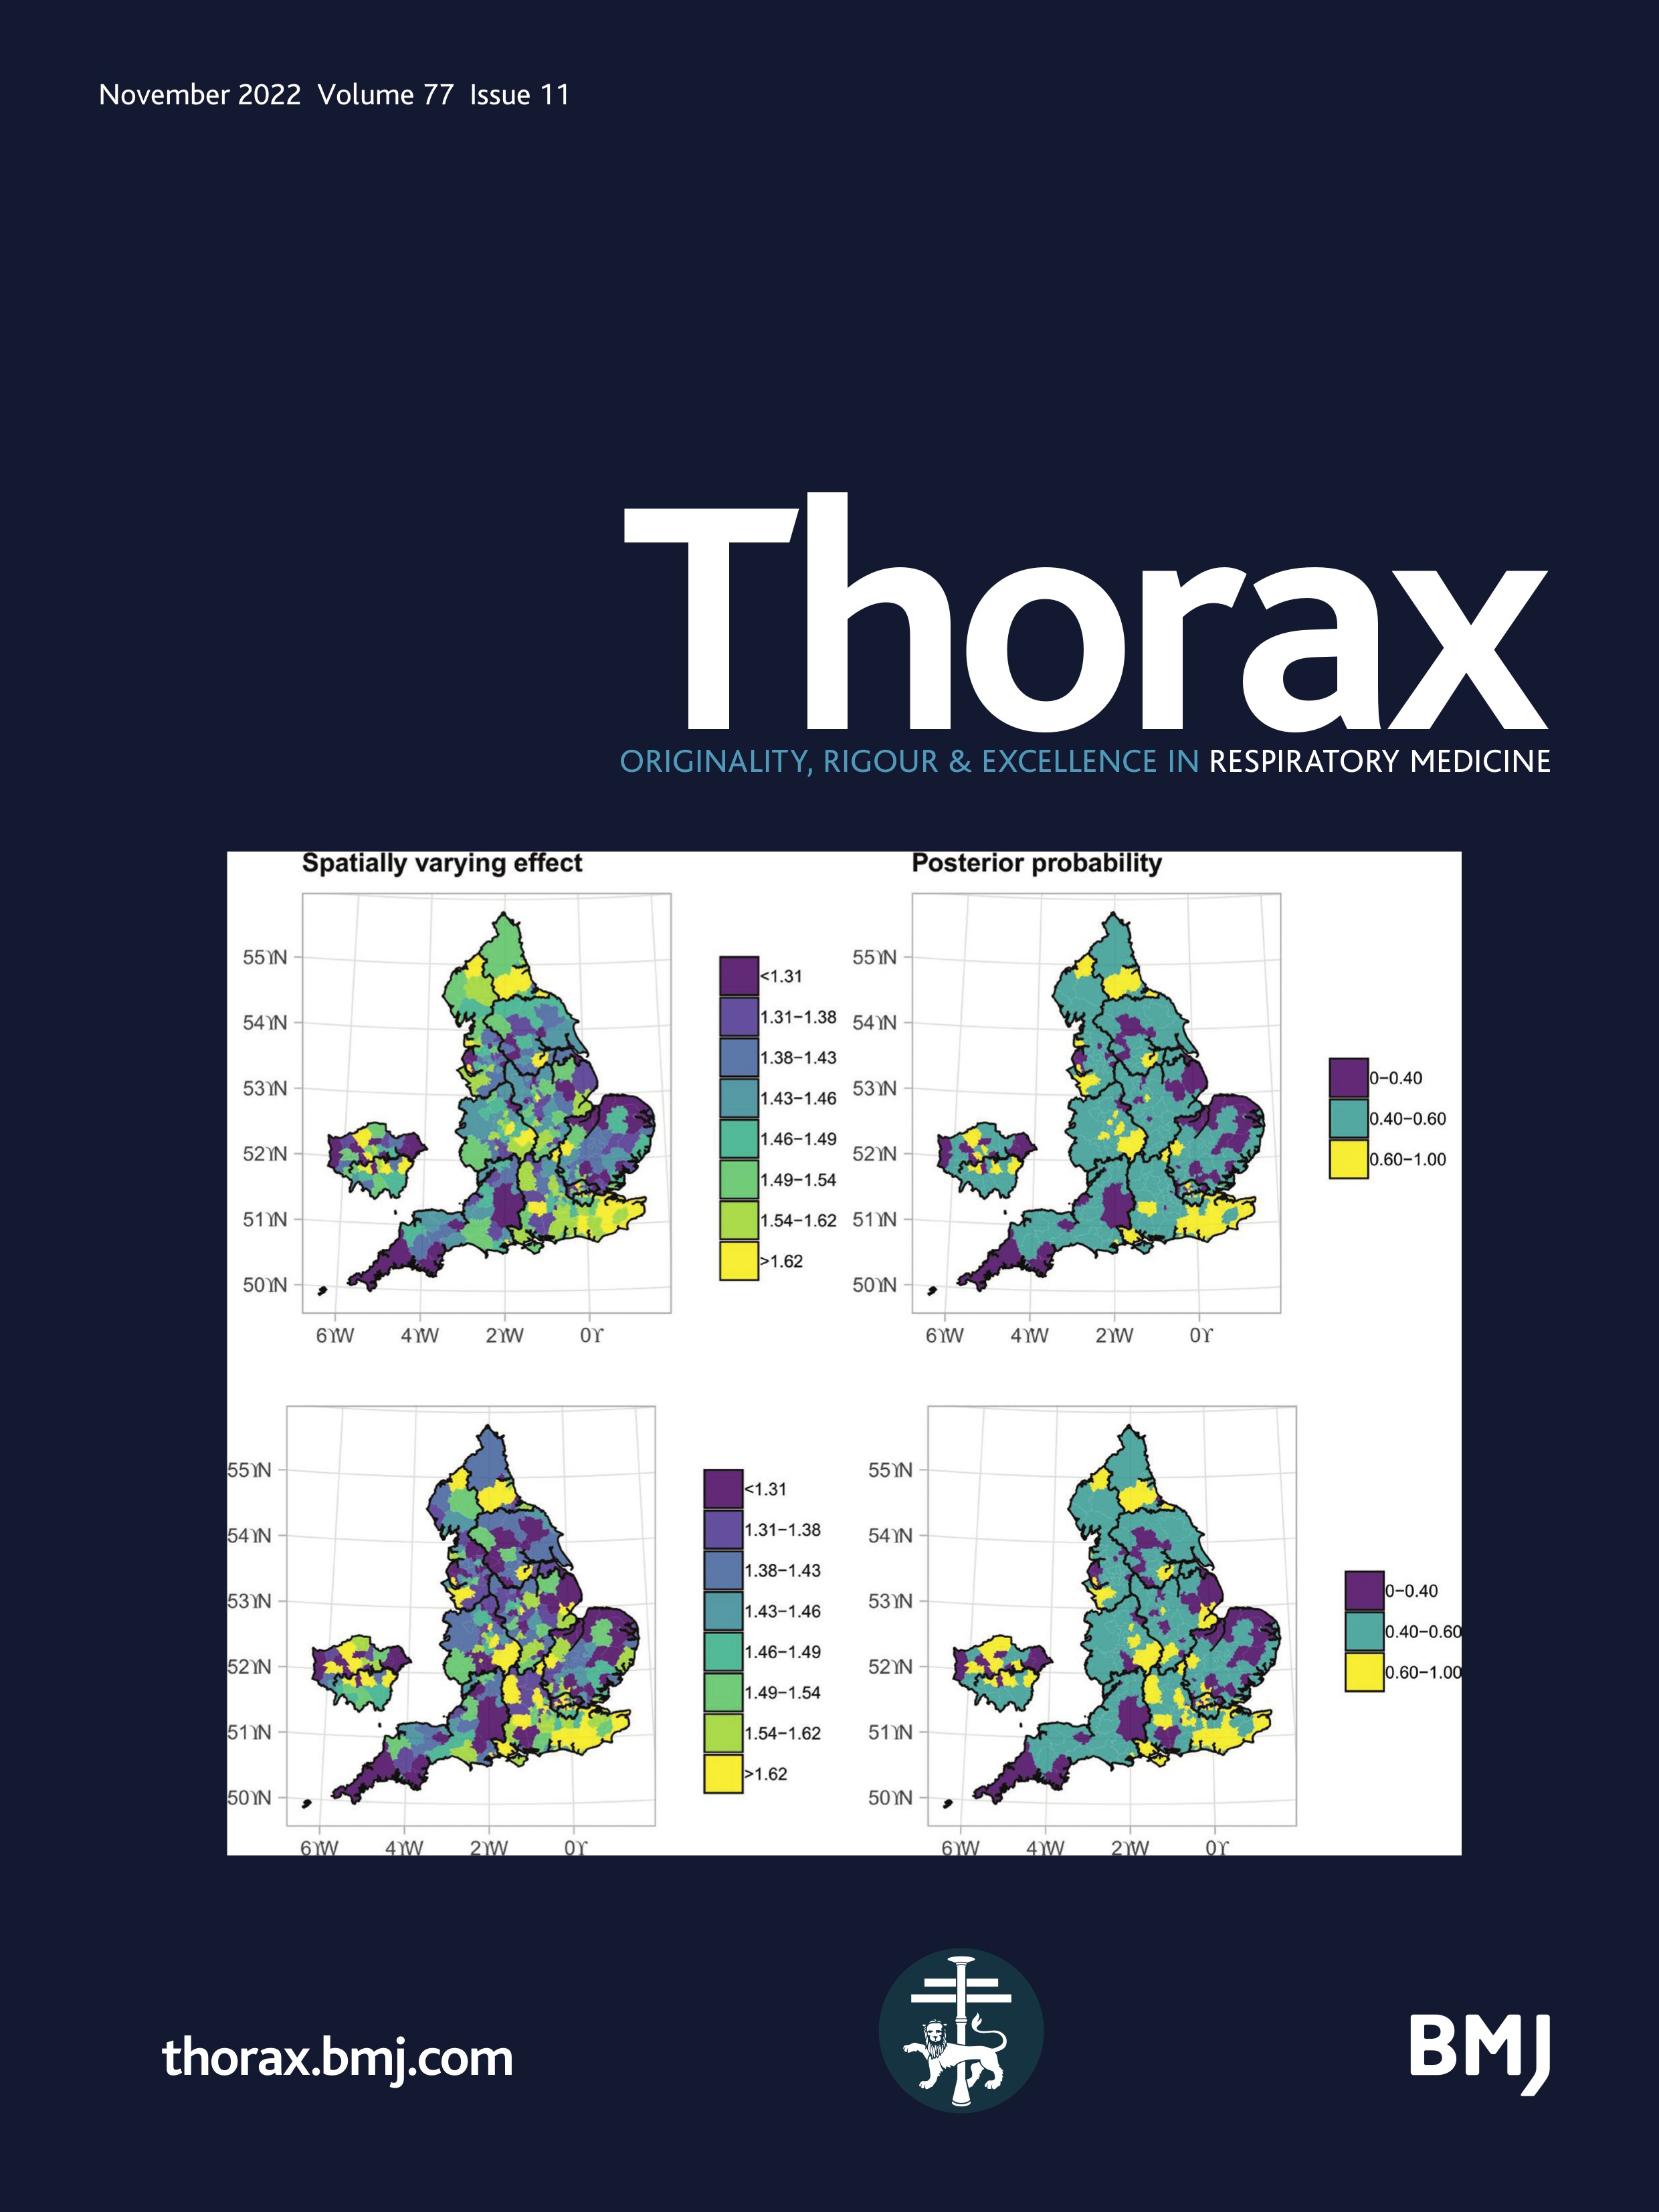 Previous tuberculosis disease as a risk factor for chronic obstructive pulmonary disease: a cross-sectional analysis of multicountry, population-based studies